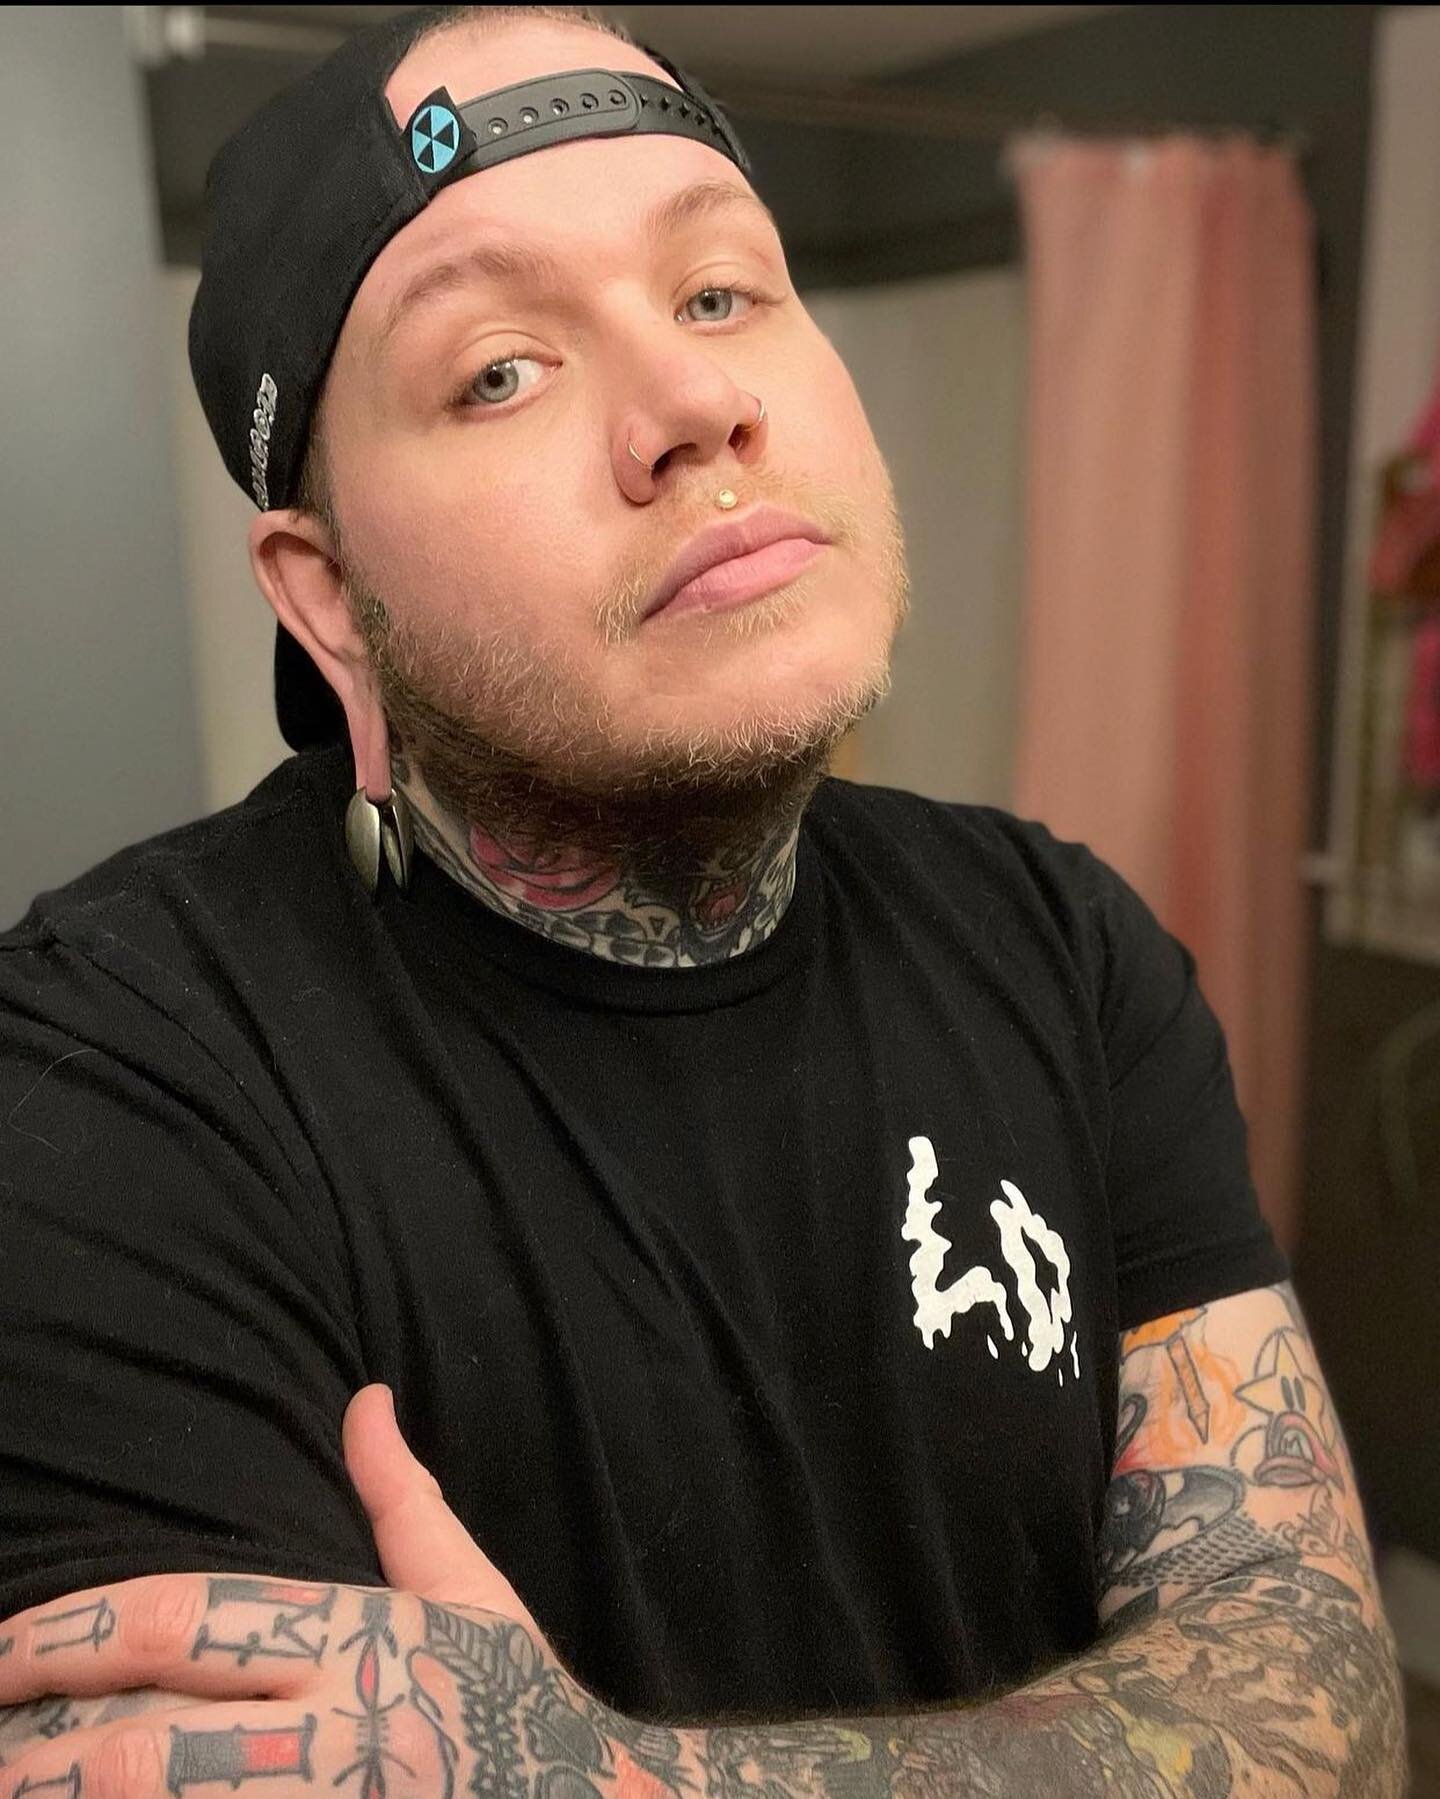 Next week (7/6 - 7/10) we&rsquo;re happy to welcome Jake Hinkle to our studio while Kelly is out! @jakehinklepiercings takes his expertise all around the country as a full time traveling piercer. You can book an appointment with him via our website f